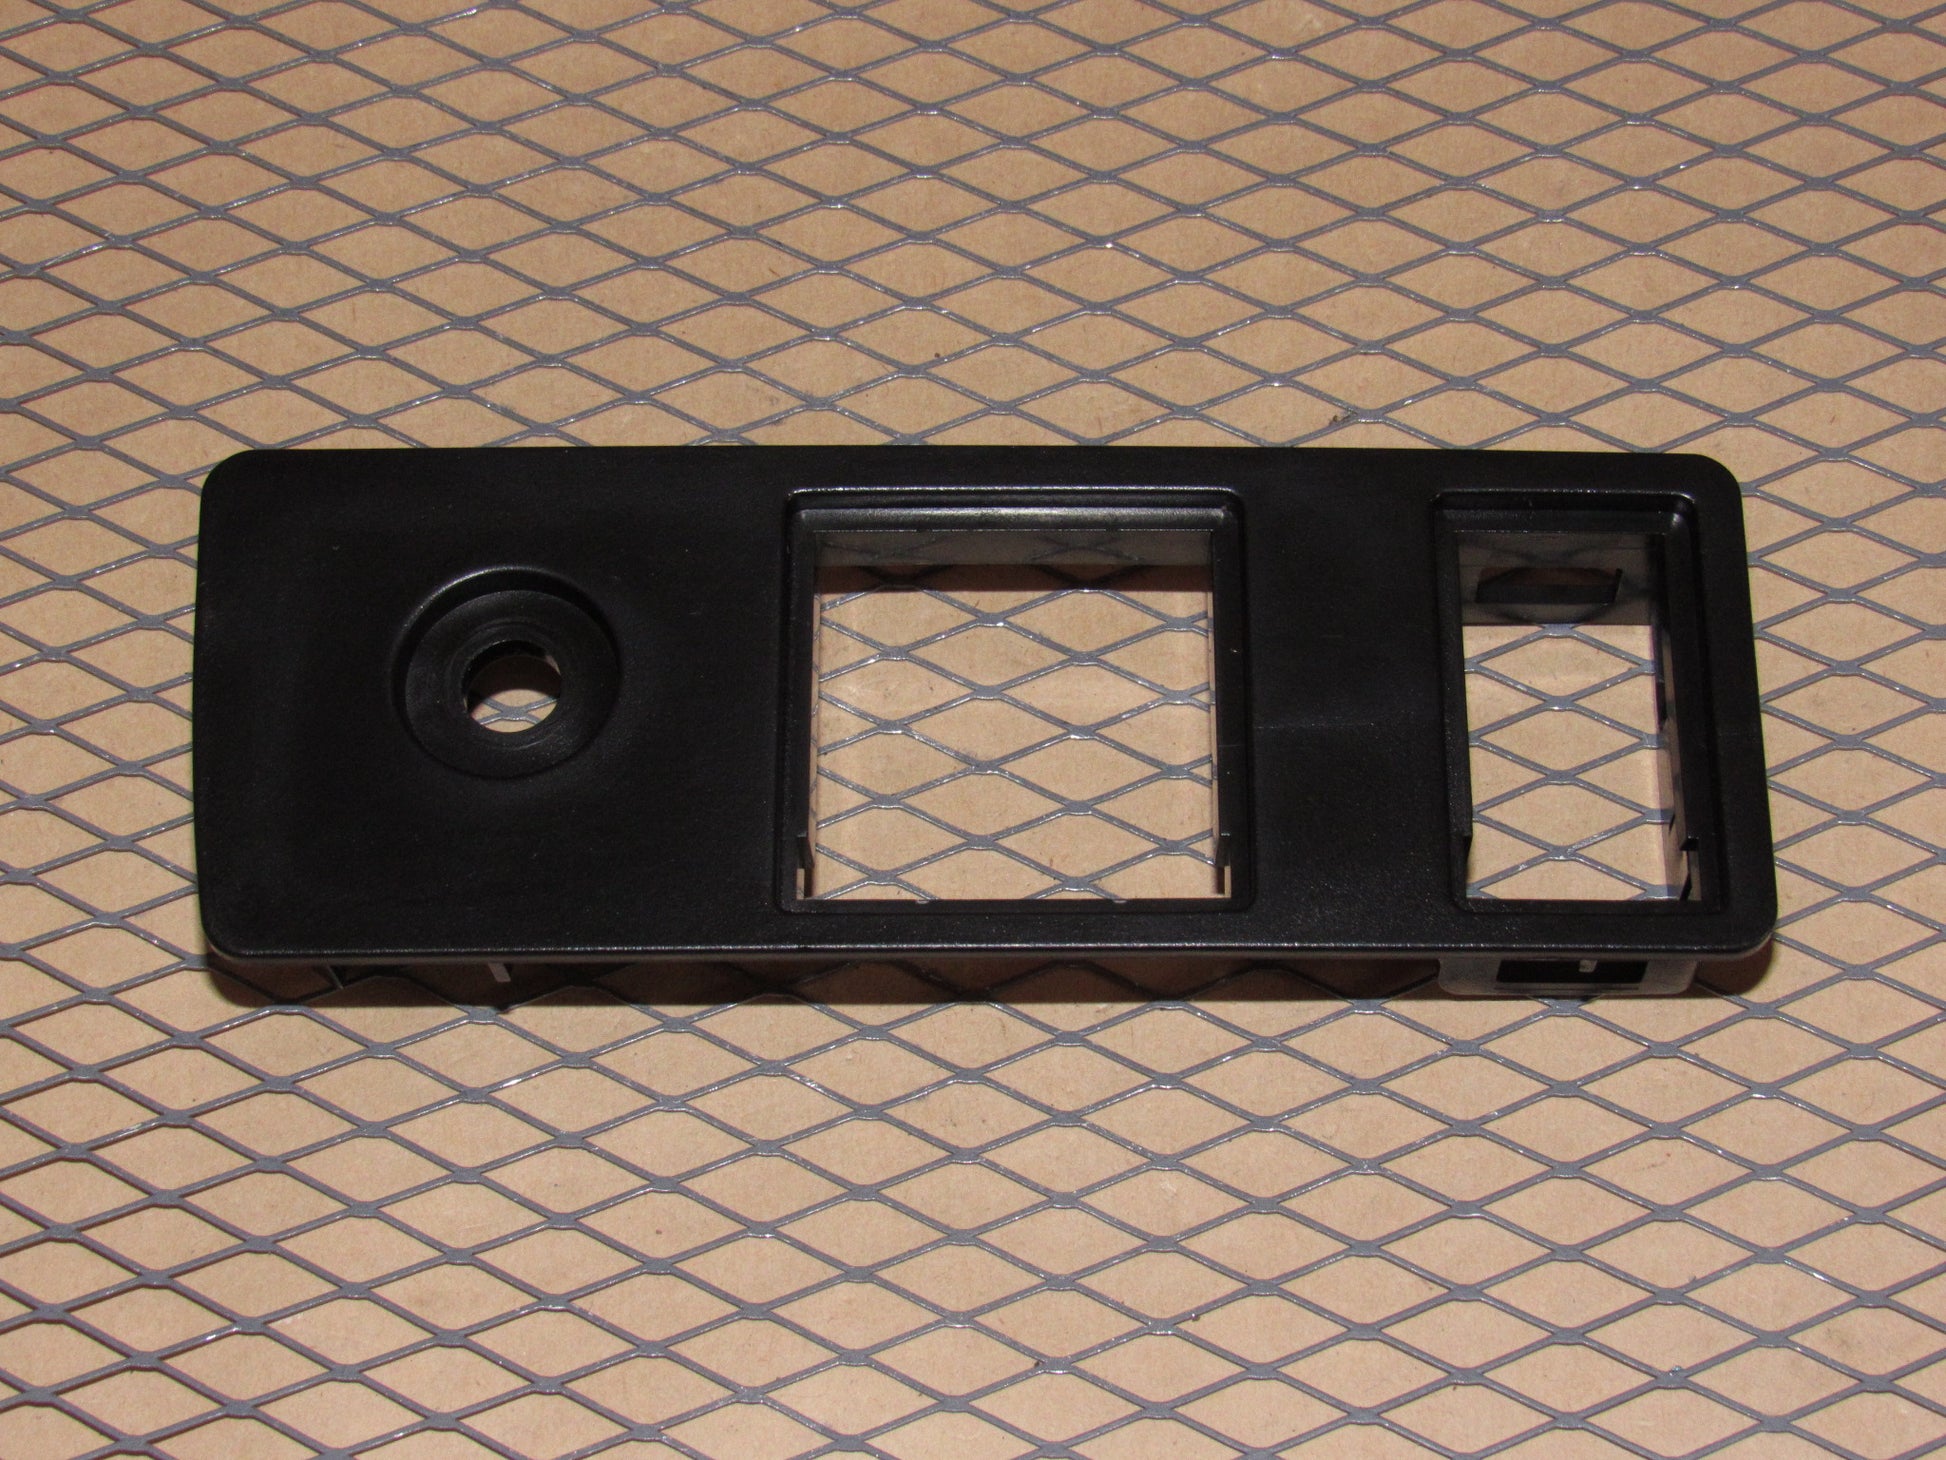 88 89 90 91 Toyota Camry OEM Dimmer Switch Mounting Bezel Trim Cover